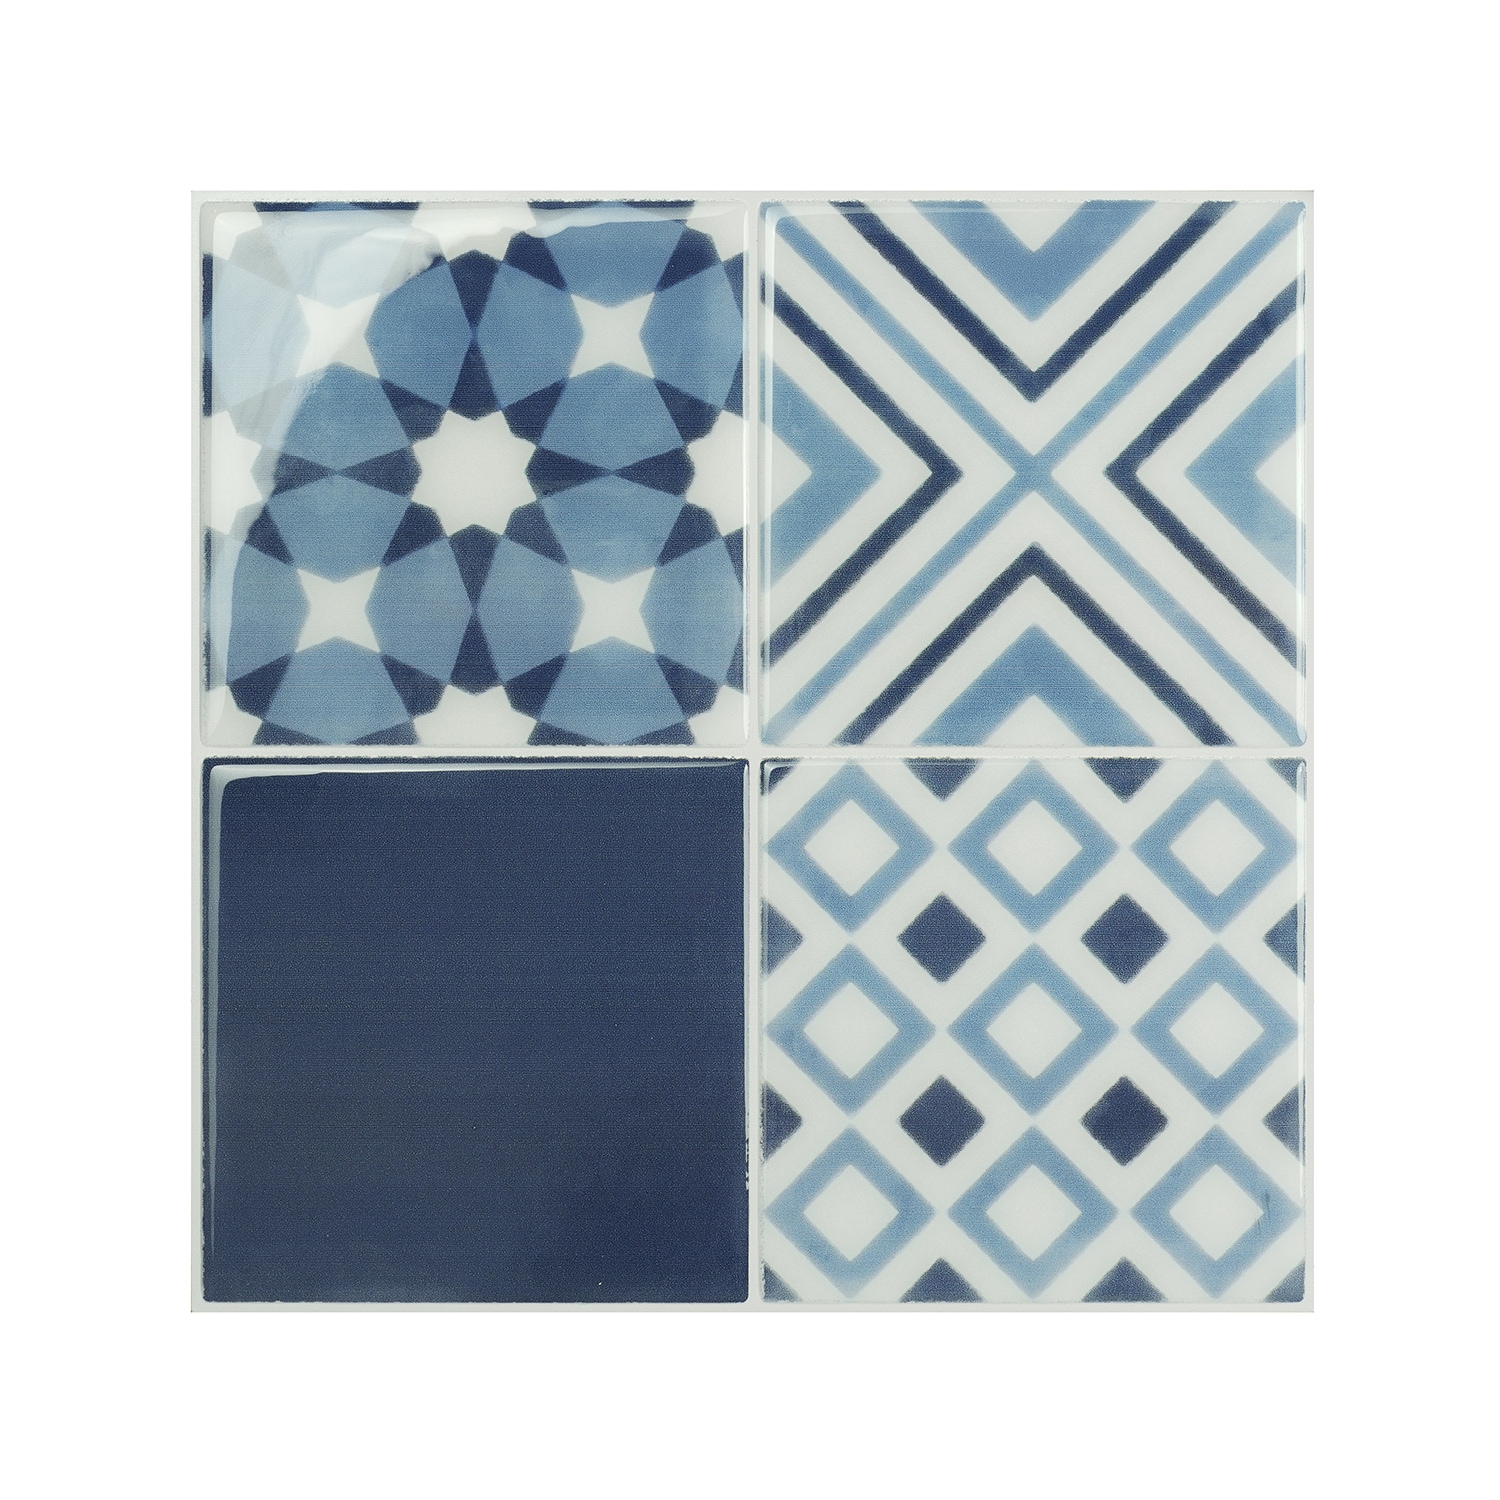 Smart Tiles Penny Davy 4-Pack Navy Blue 9-in x 9-in Glossy Resin Peel & Stick Wall Tile